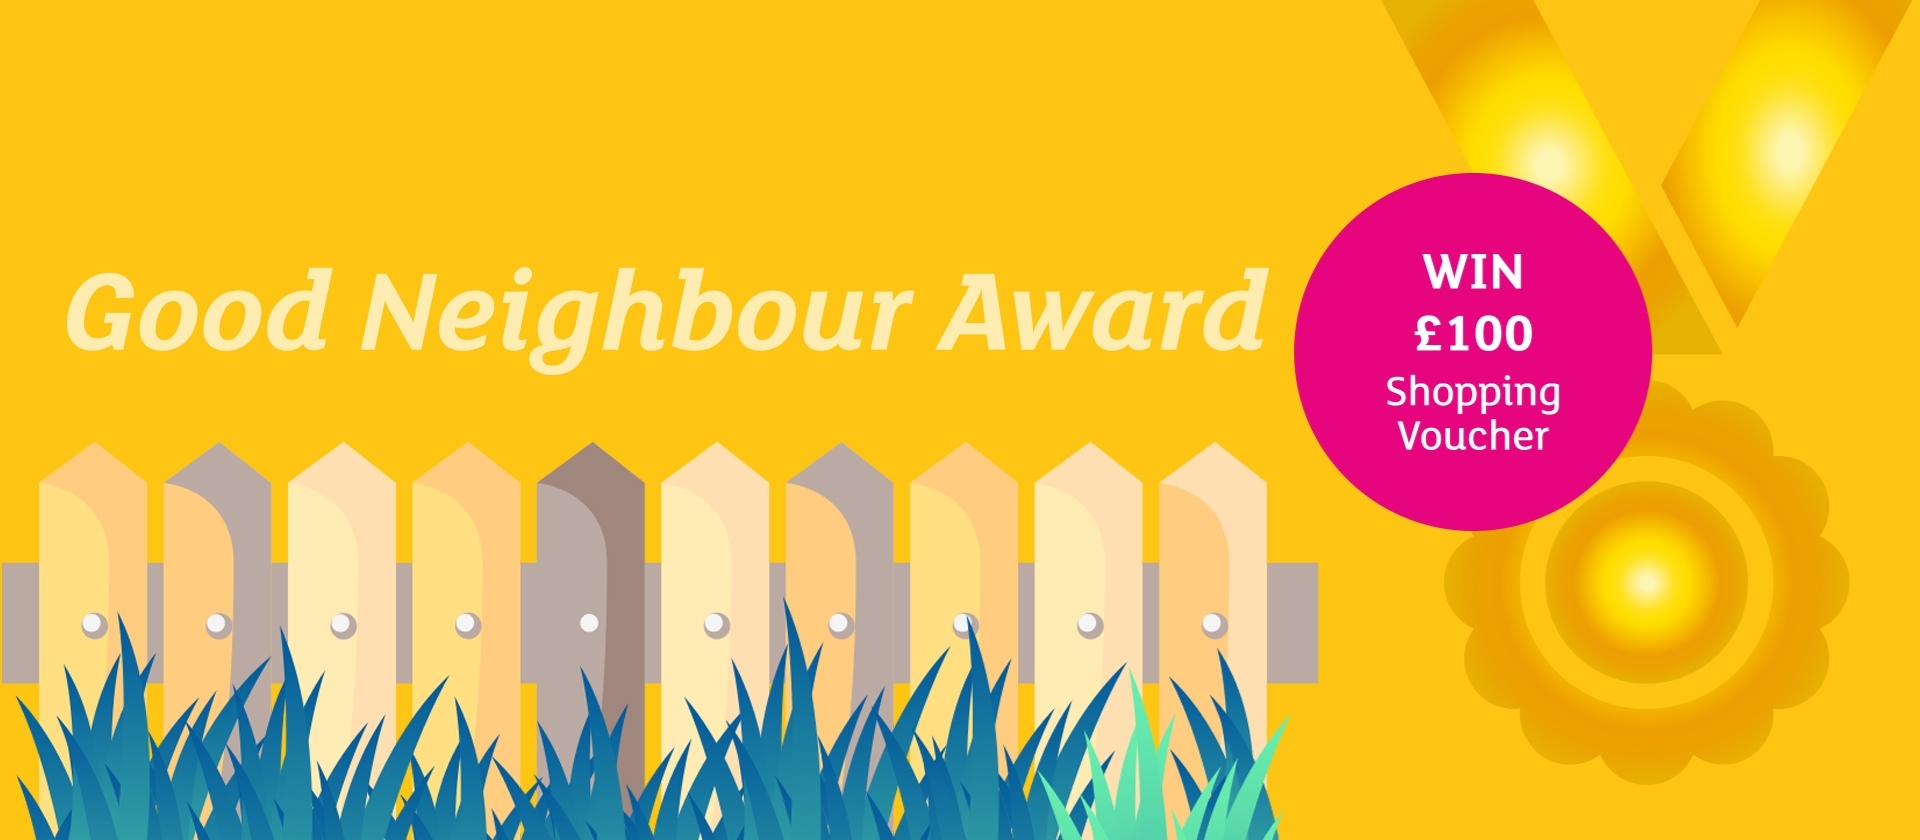 Good Neighbour Competition Now Open for Entries!